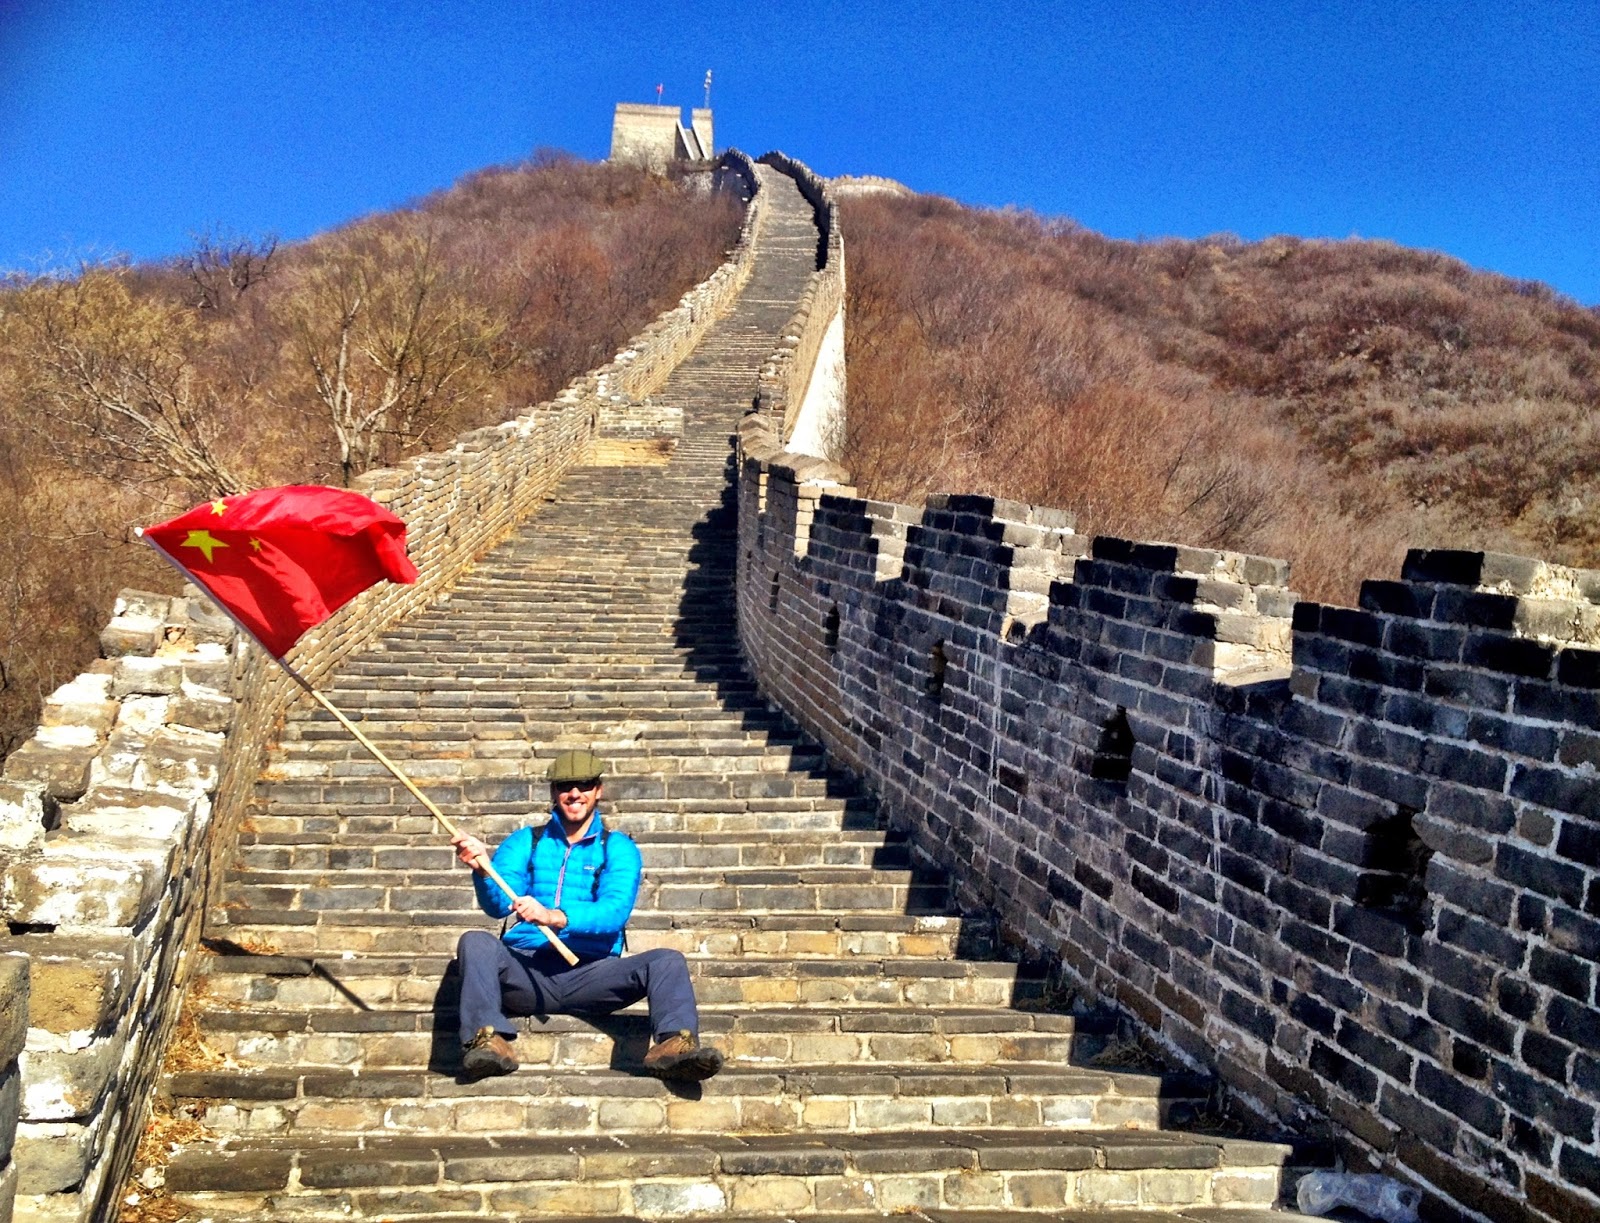 Simon waving a Chinese flag on the Great Wall